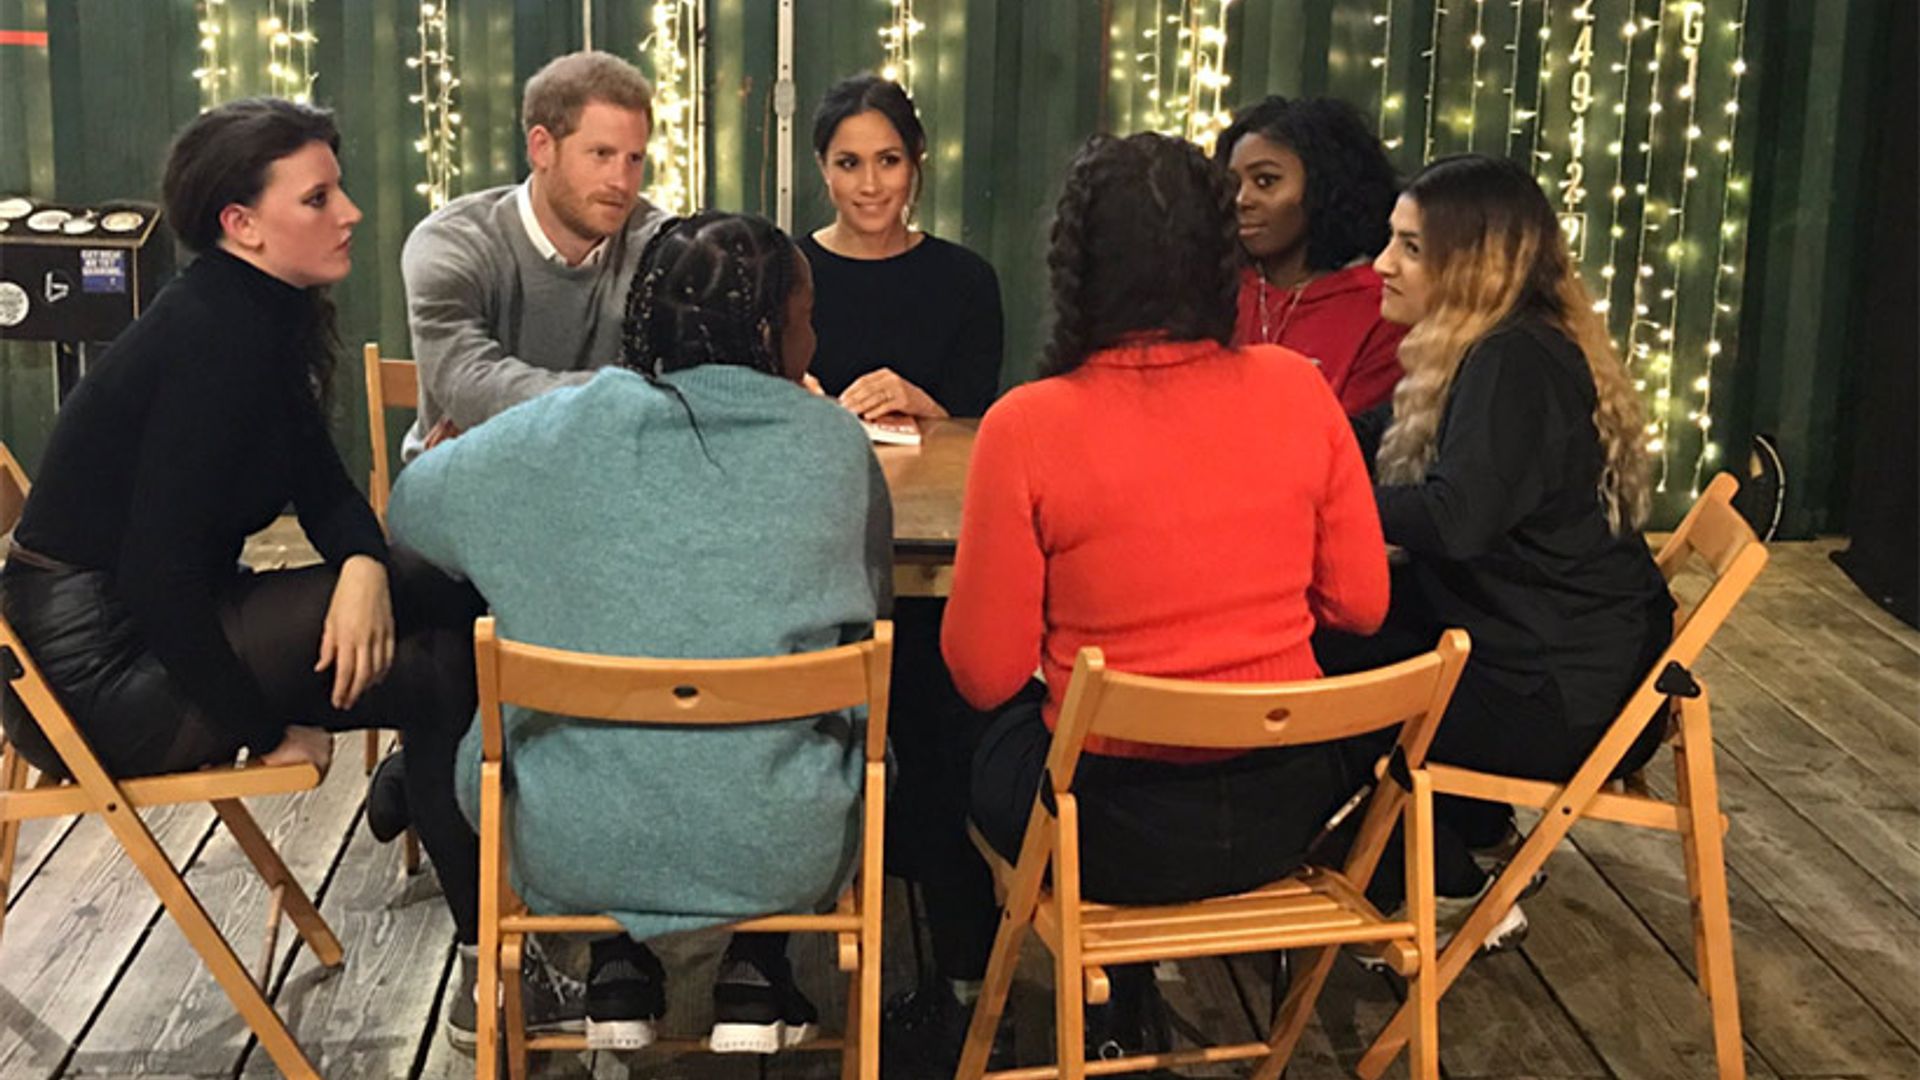 Prince Harry and Meghan Markle's second joint engagement in Brixton: all the photos